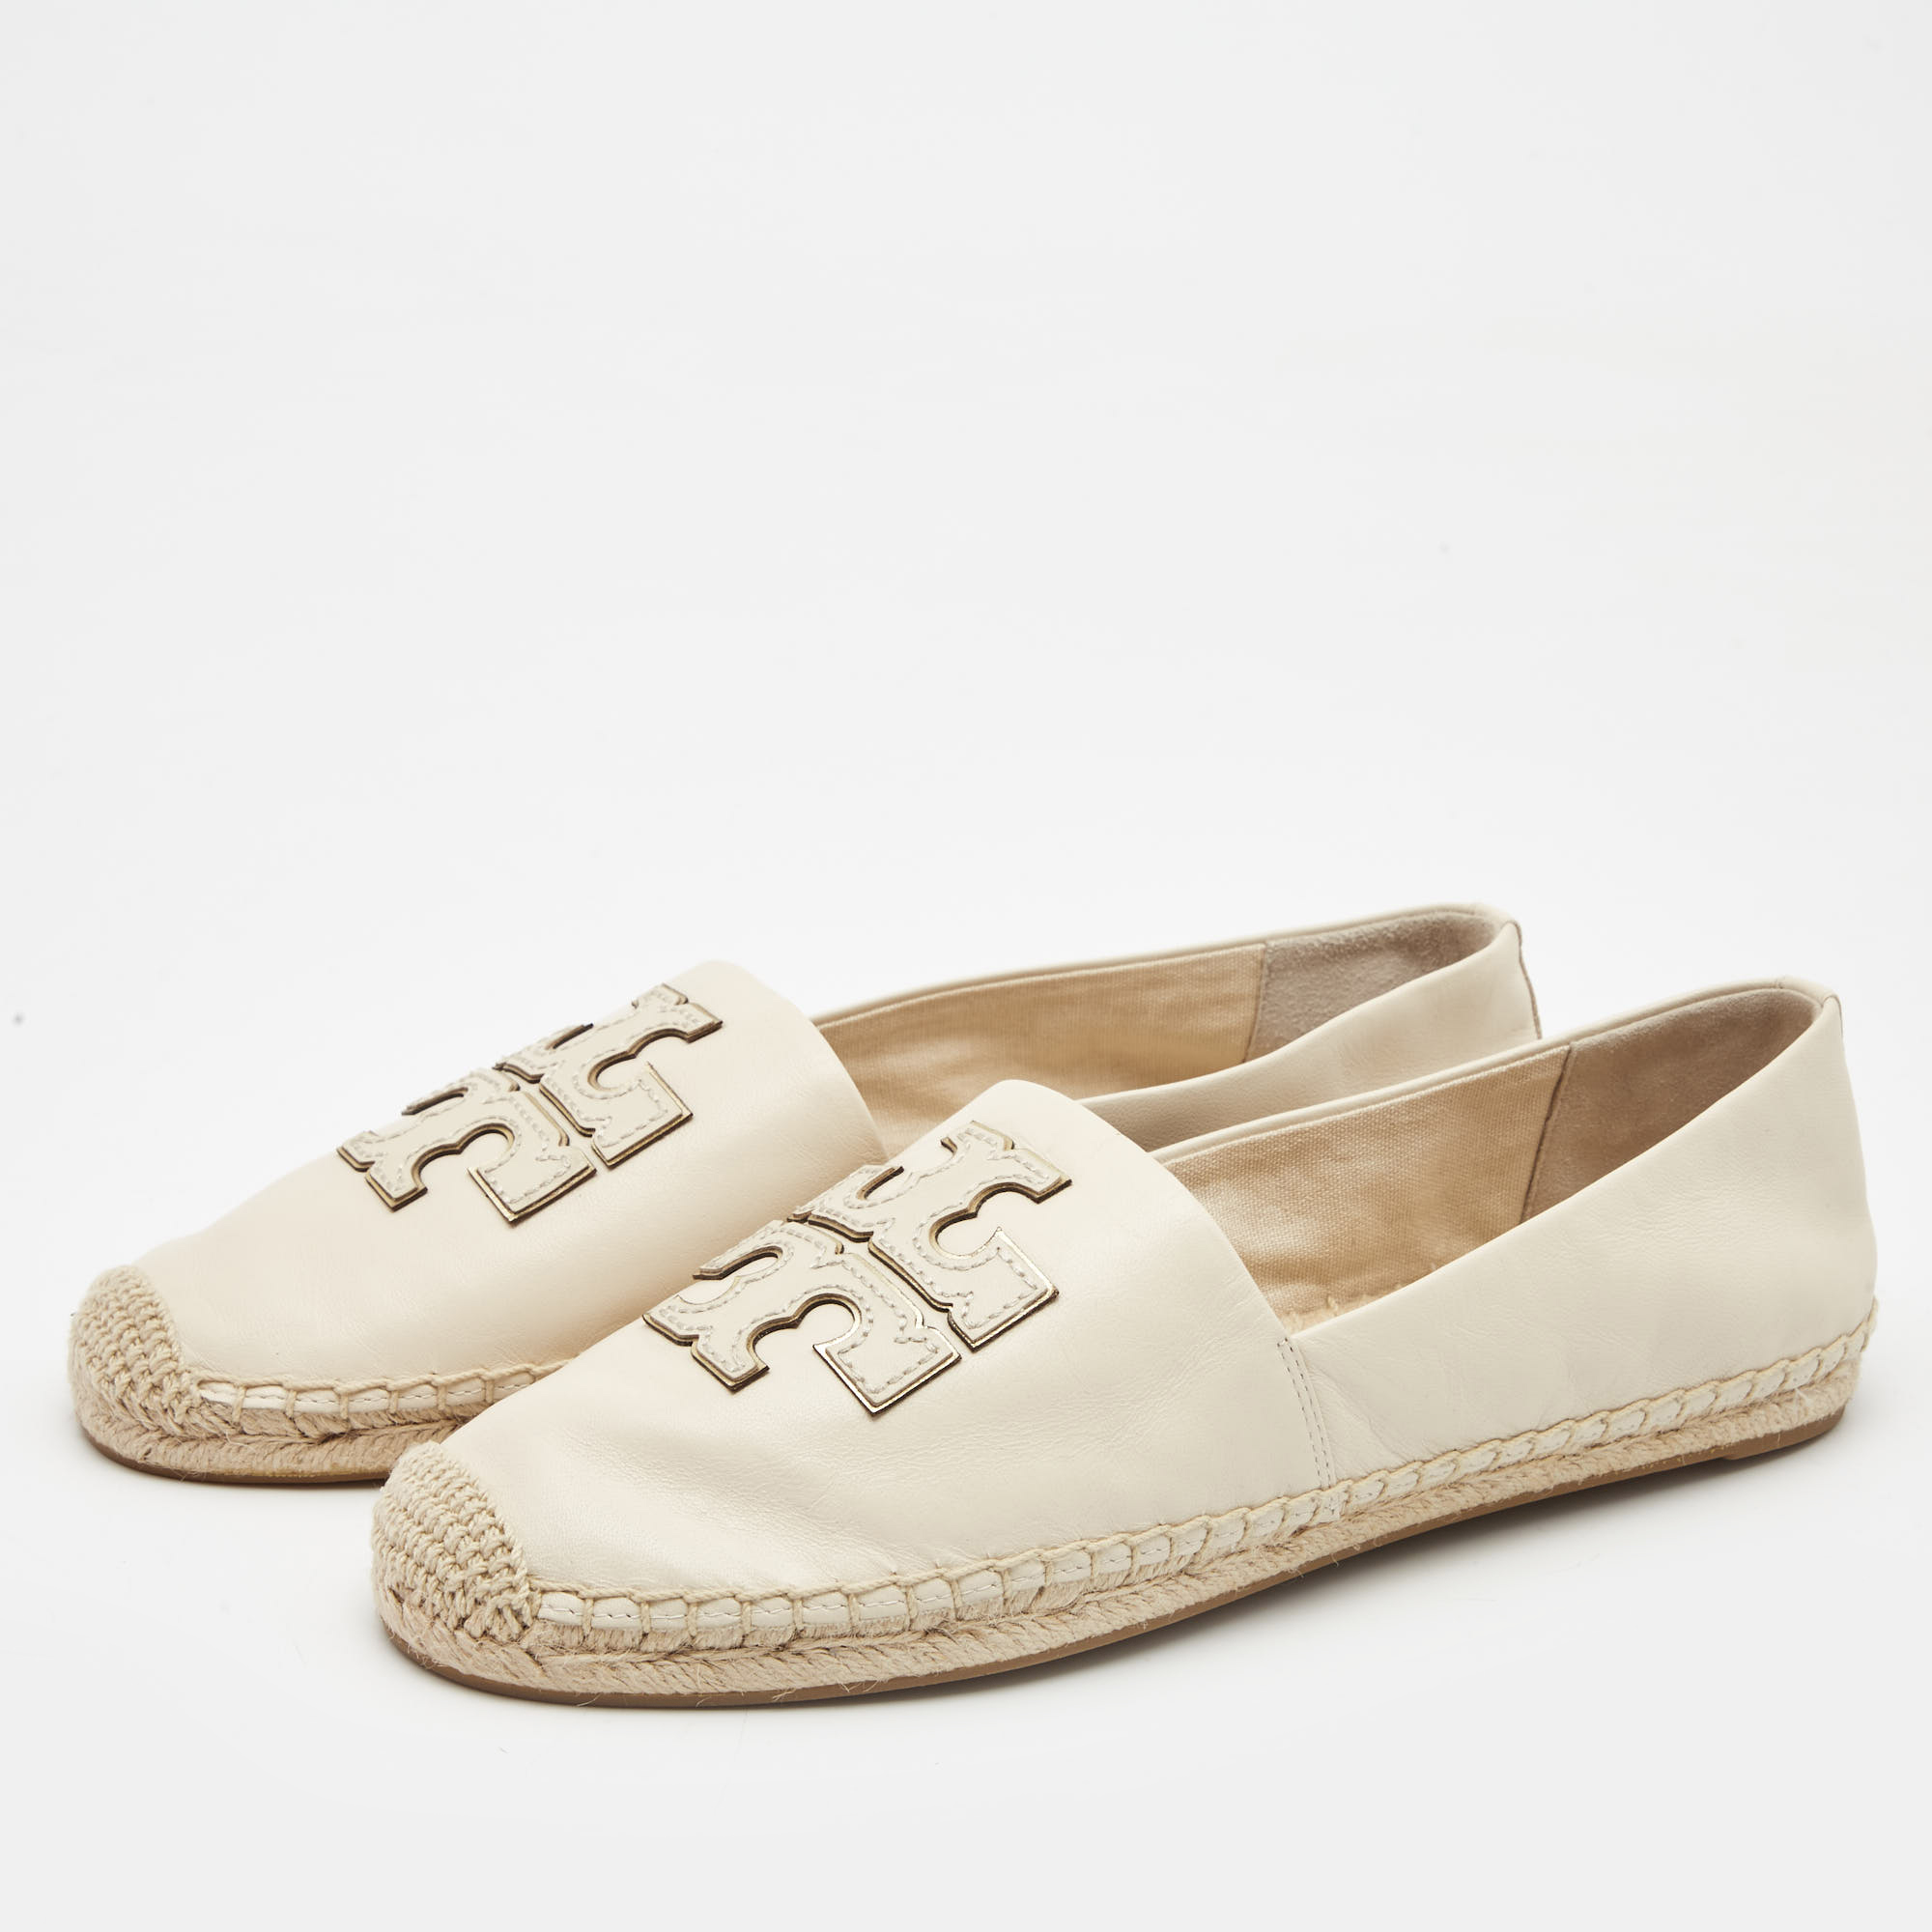 

Tory Burch Cream Leather Ines Espadrille Flats Size